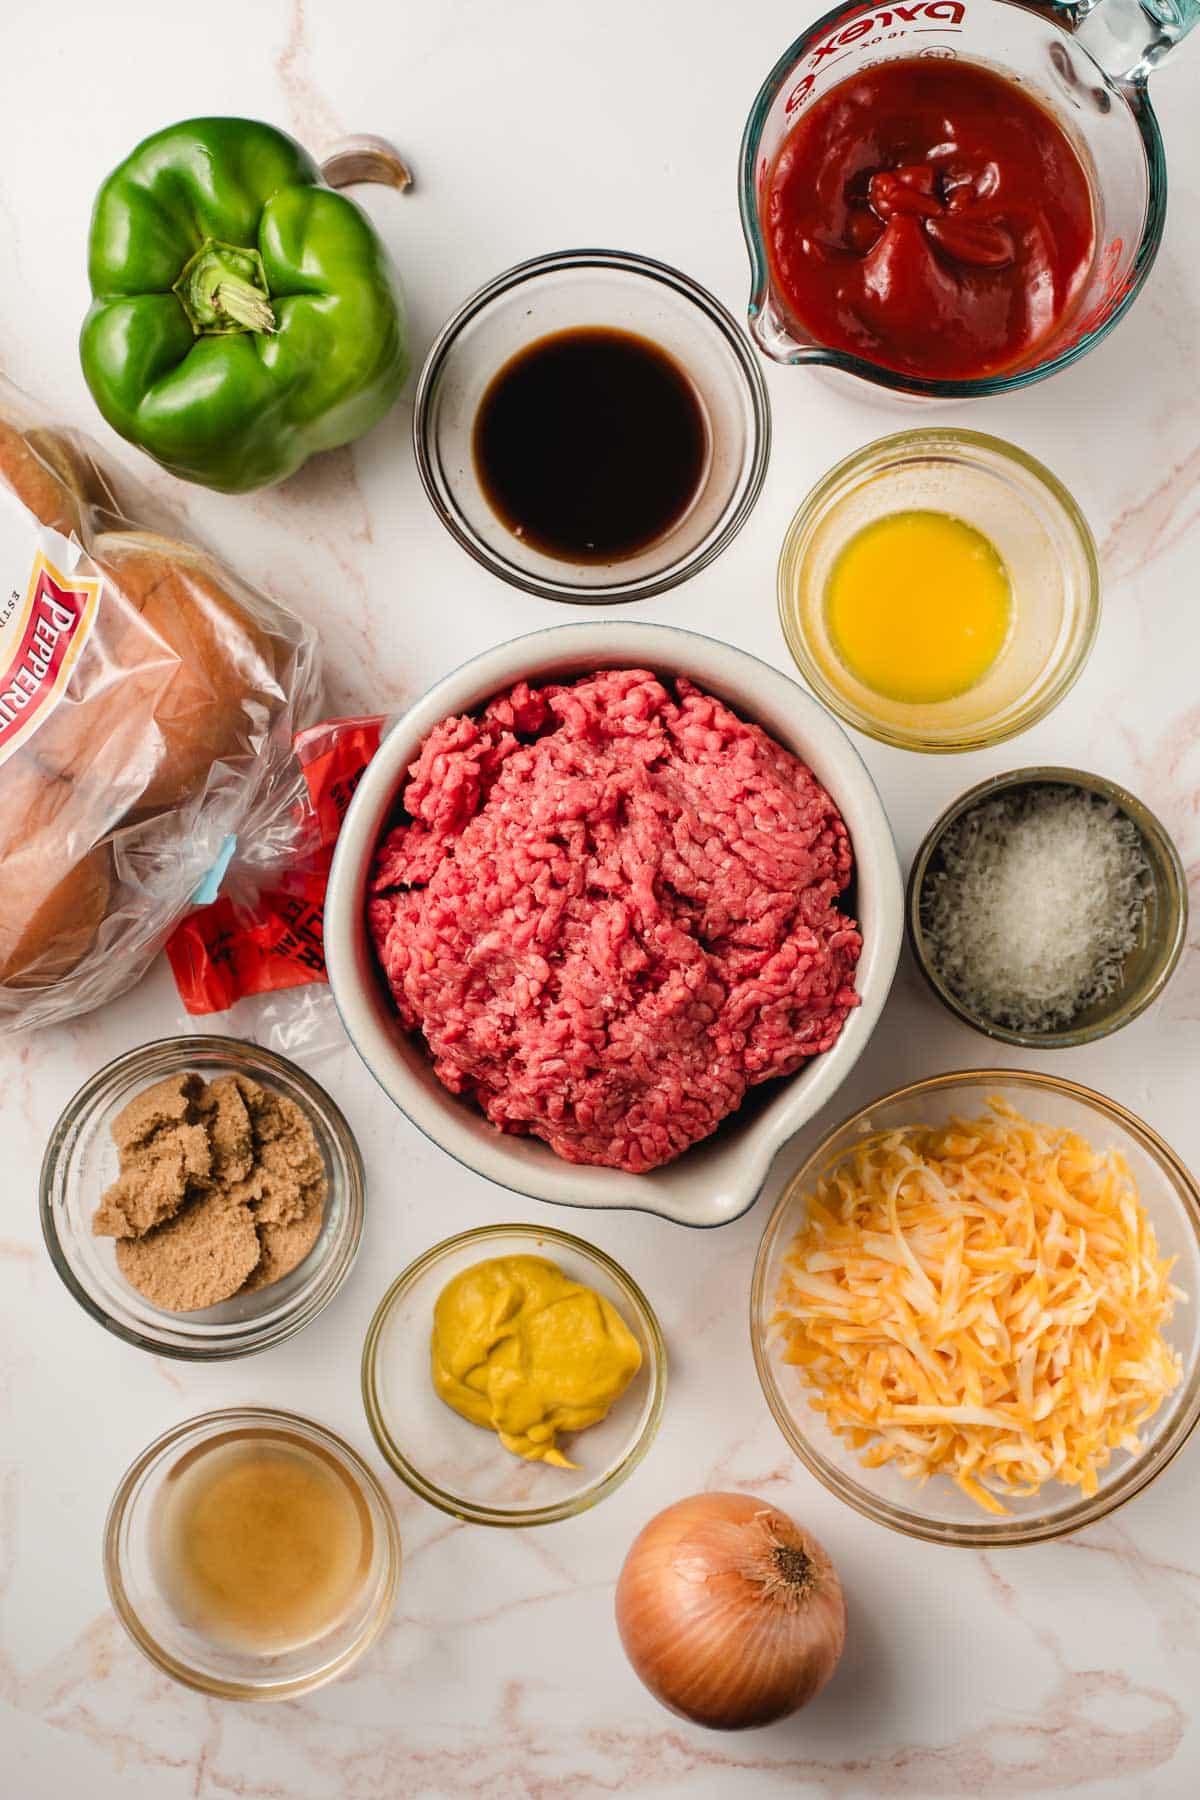 Ingredients for sloppy joe sliders set out on a table.